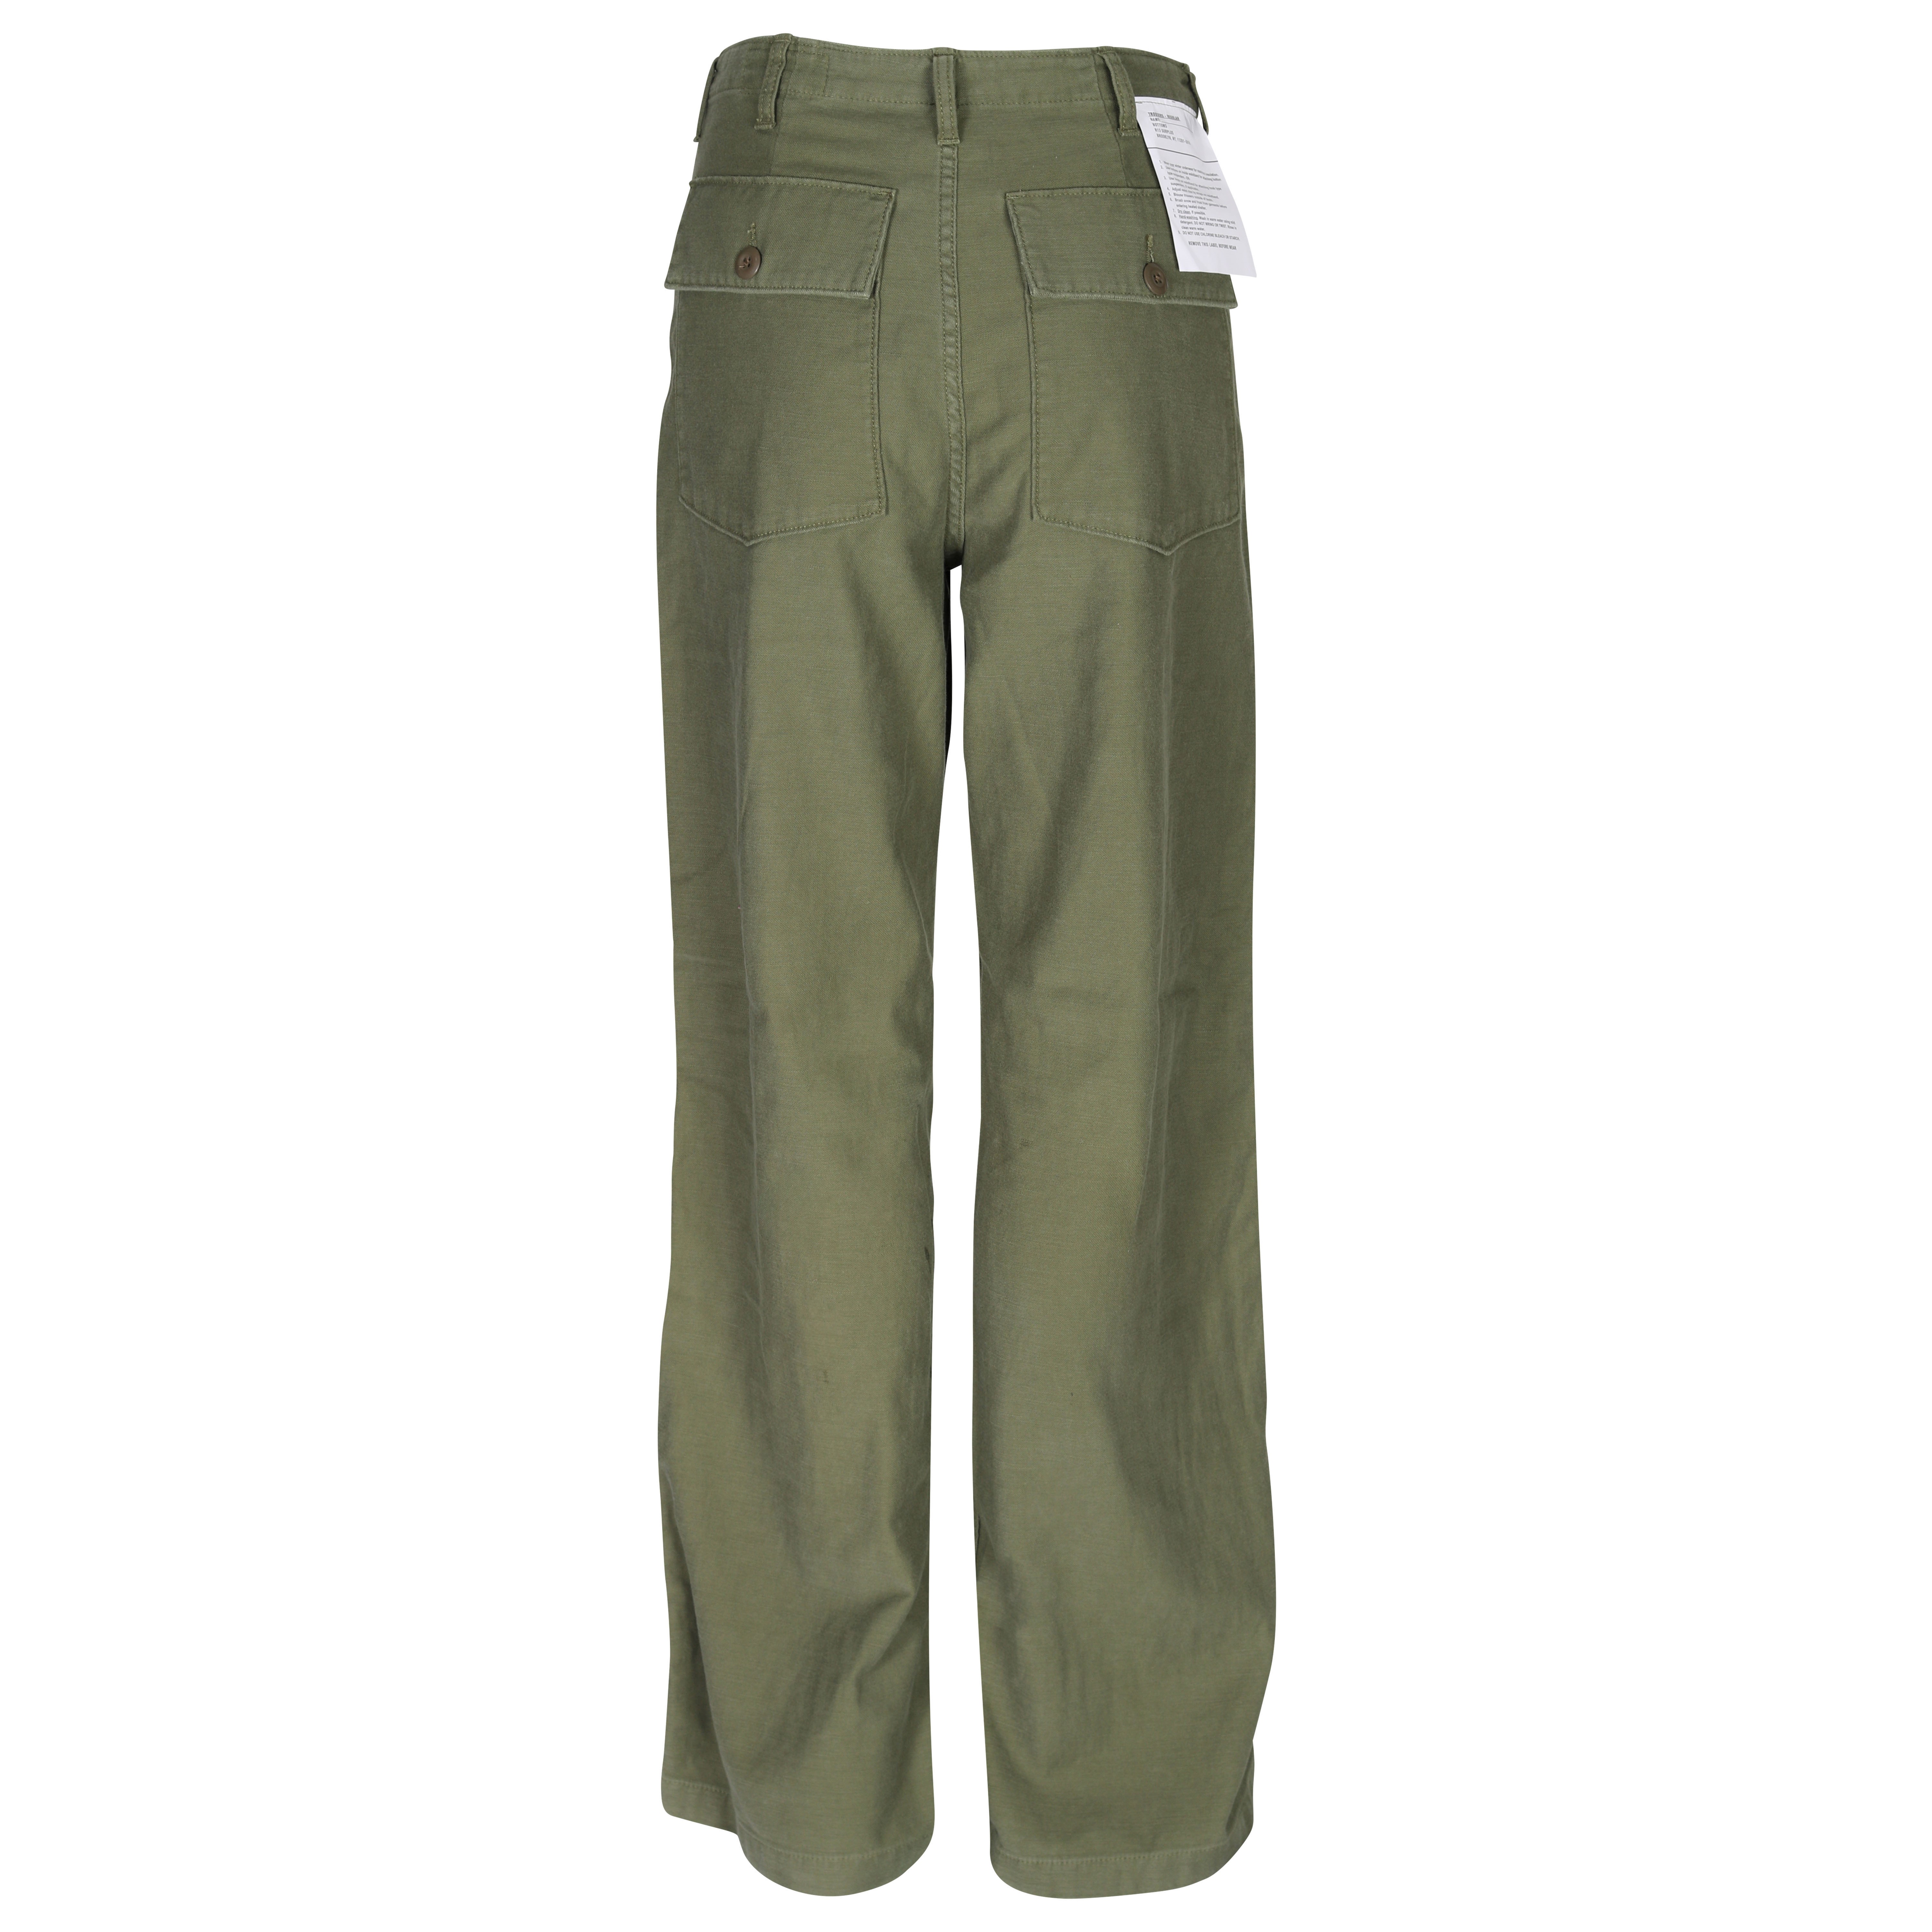 R13 Wide Leg Utility Pant in Olive 28